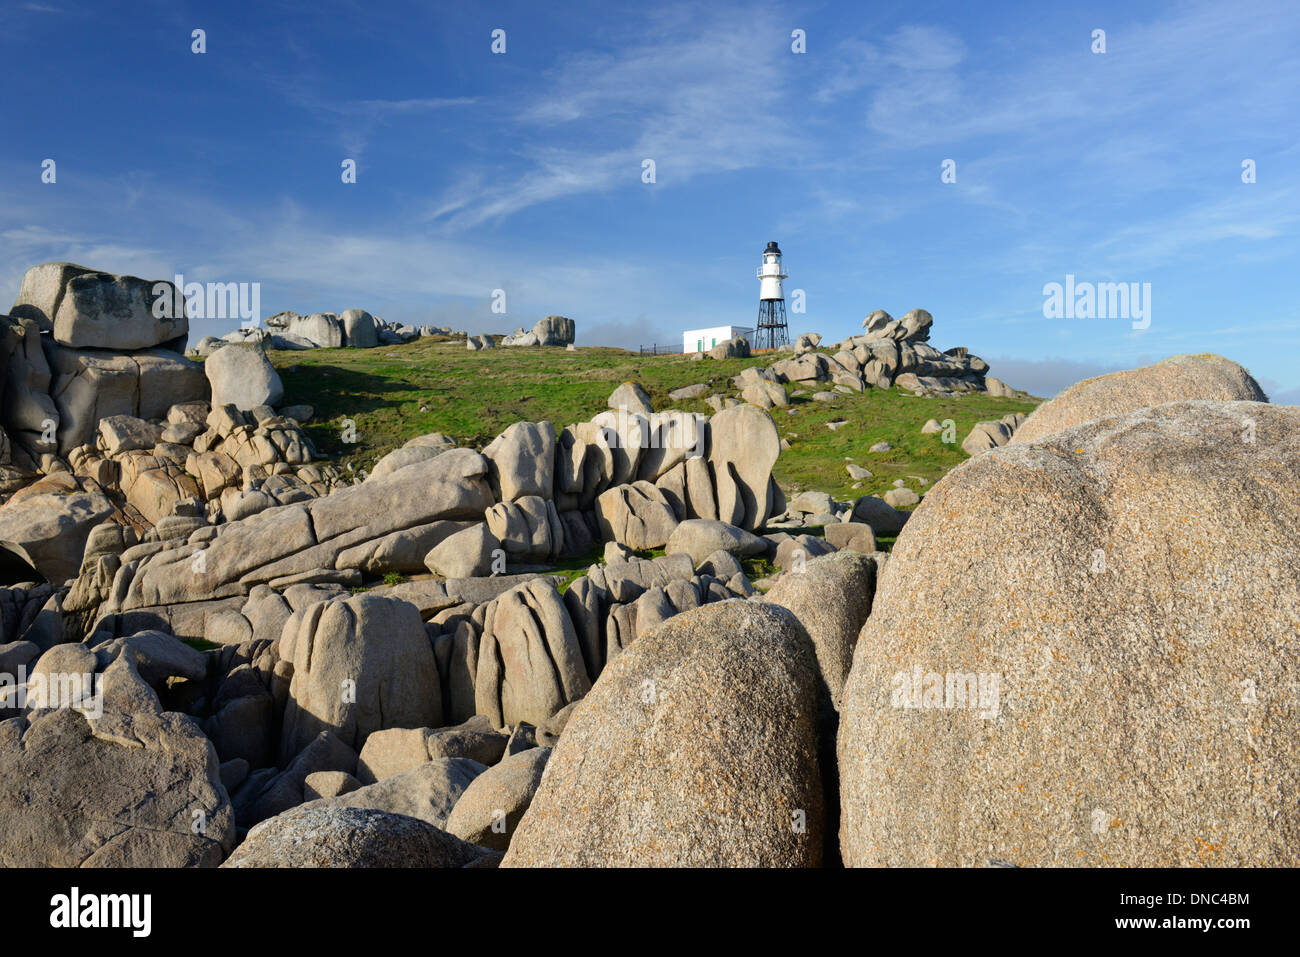 Peninnis Lighthouse on St Mary's, Isles of Scilly Stock Photo